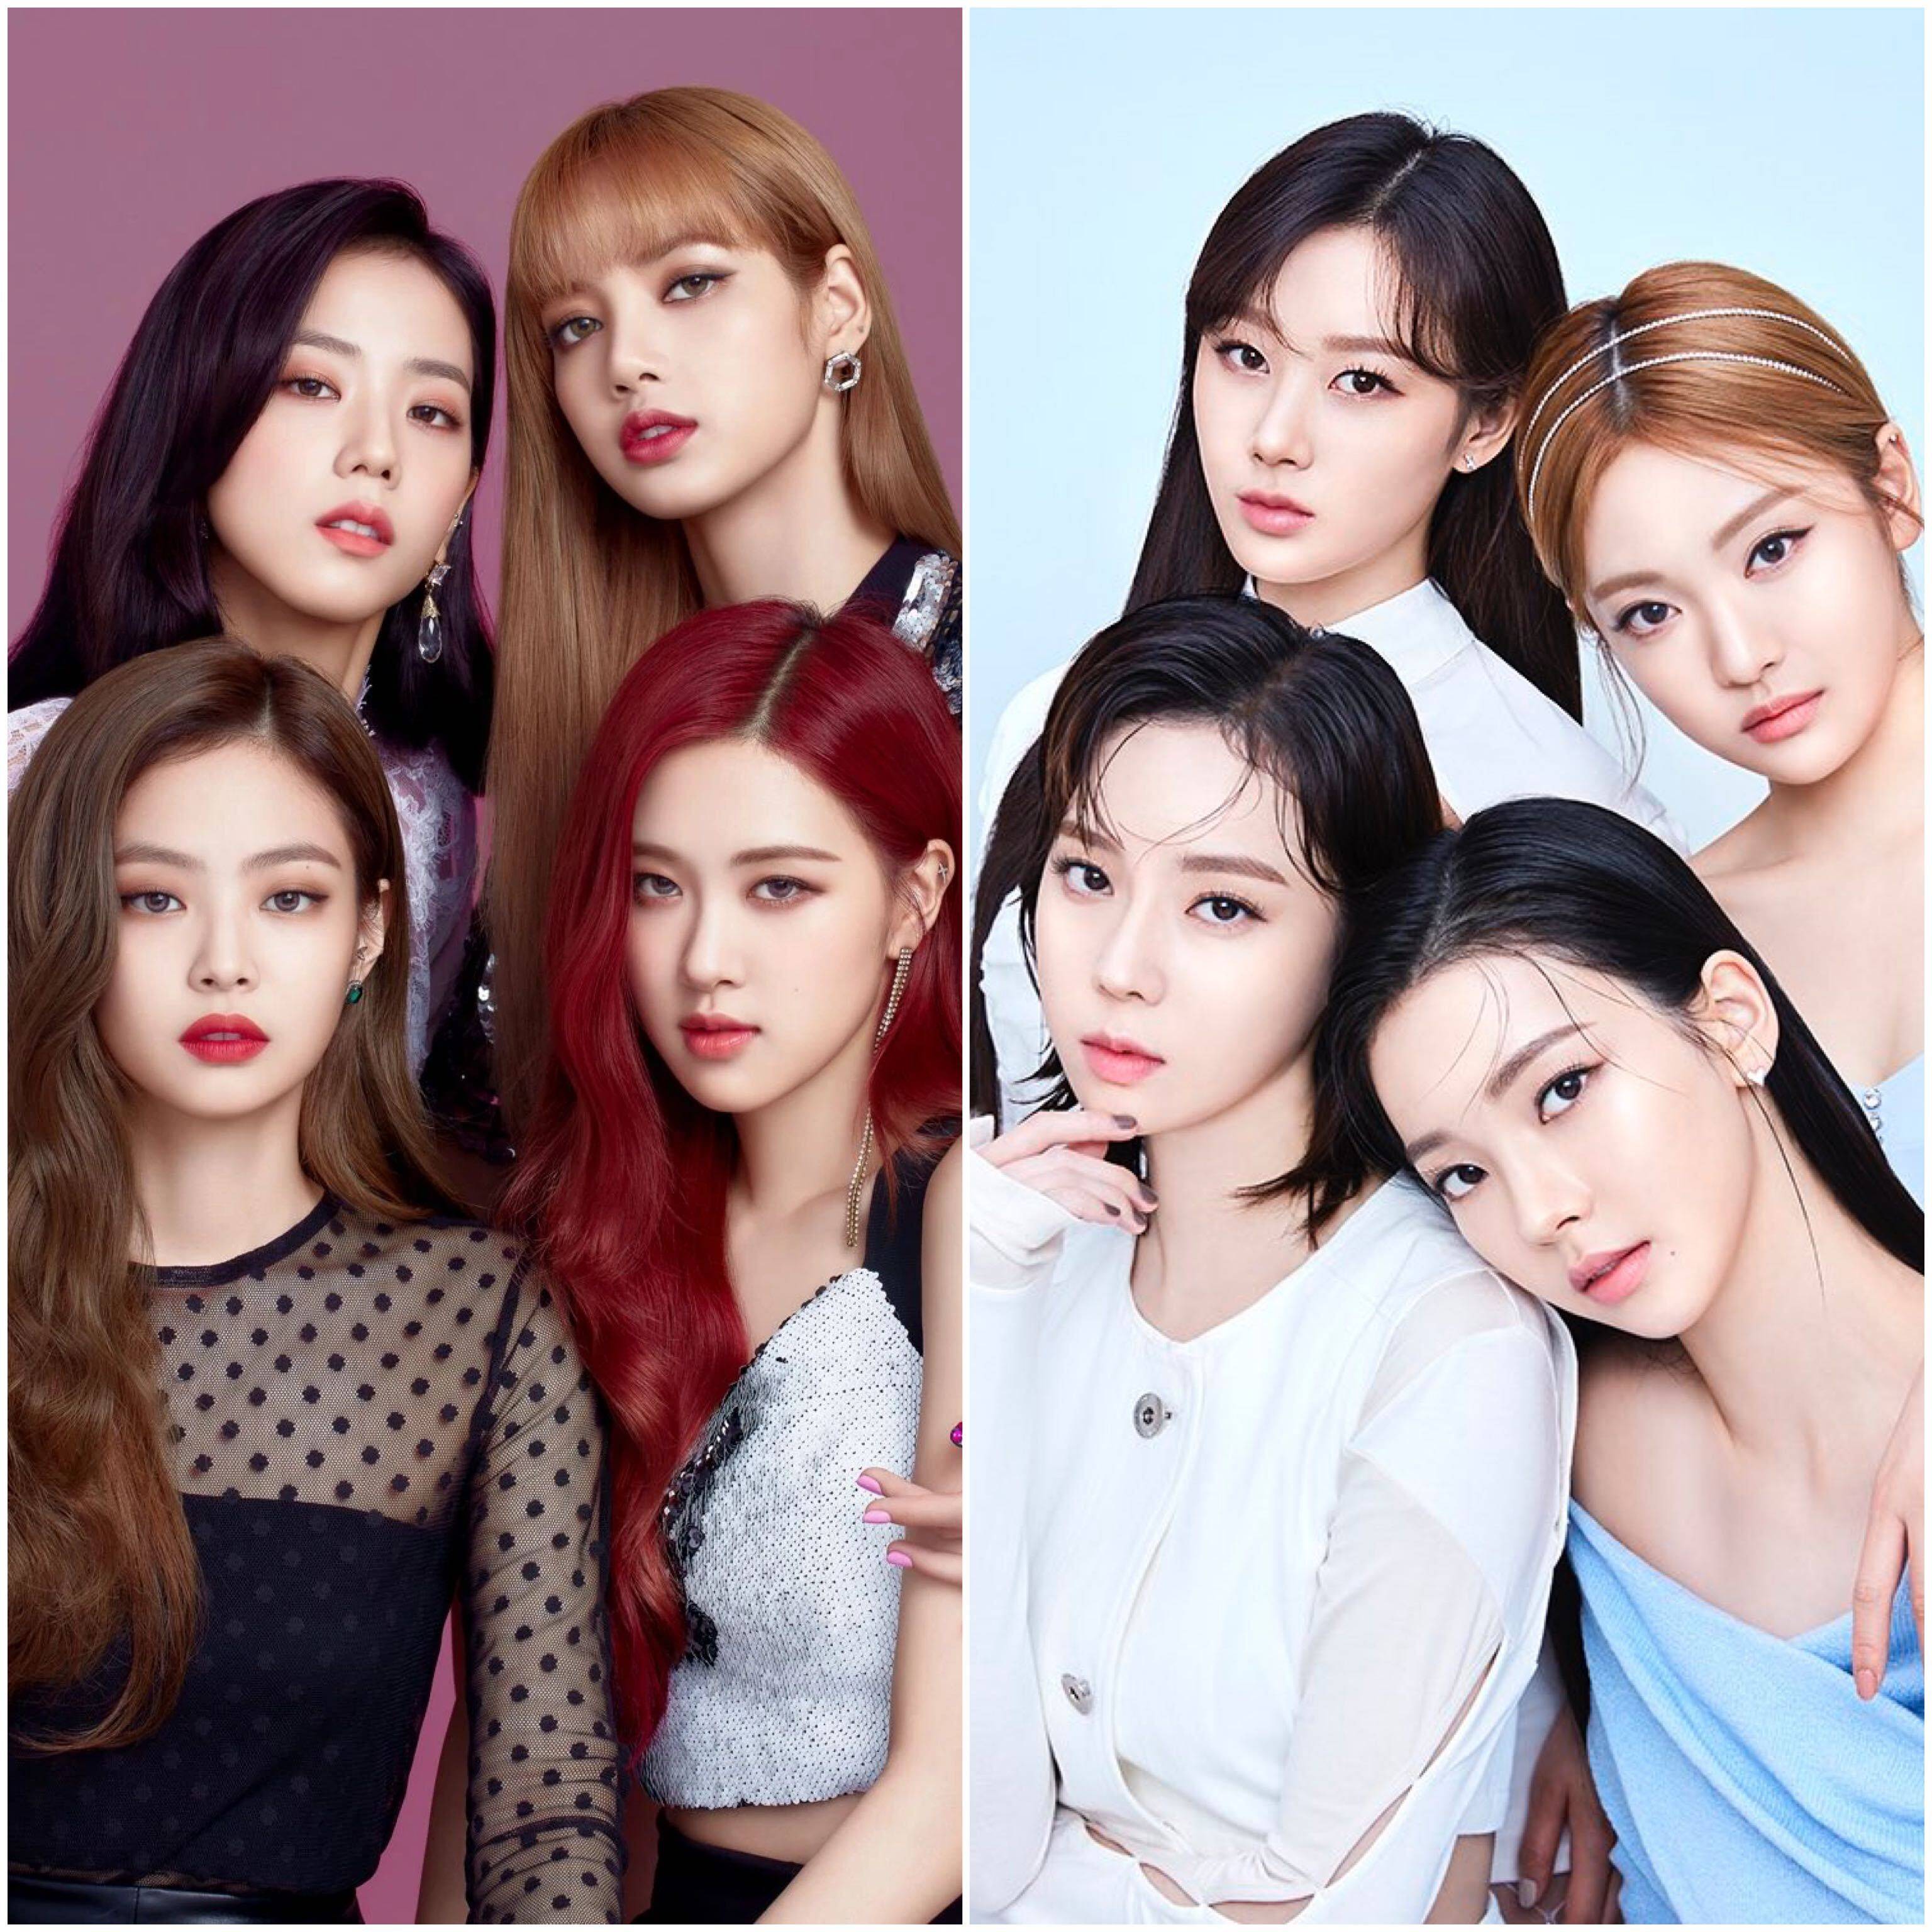 Is Aespa the new Blackpink? The K-pop supergroups, compared – from Karina,  Giselle, Winter and Ningning's Coachella performances and endorsements with  luxury brands like Givenchy, to smash hit debuts